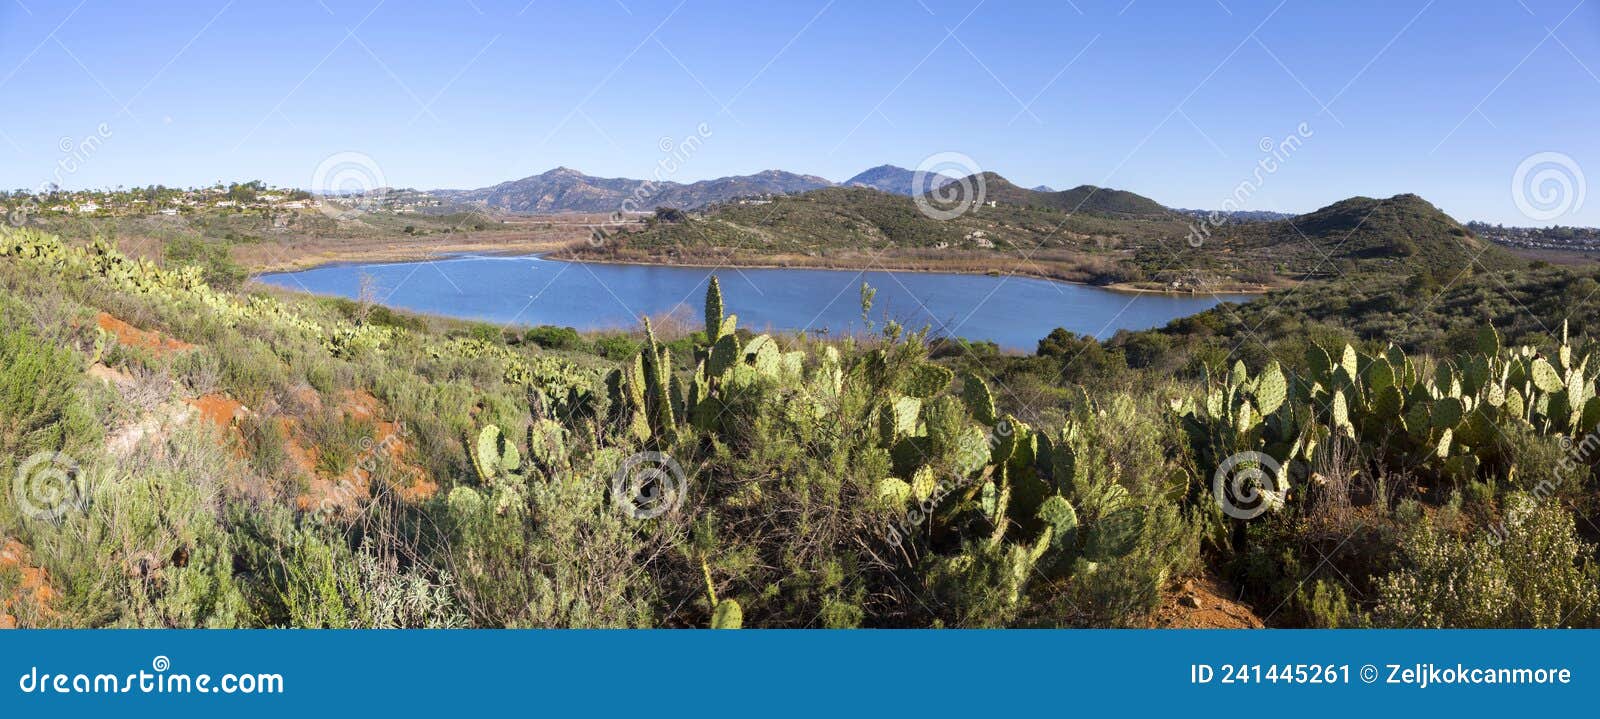 green desert cactus field and scenic blue lake hodges